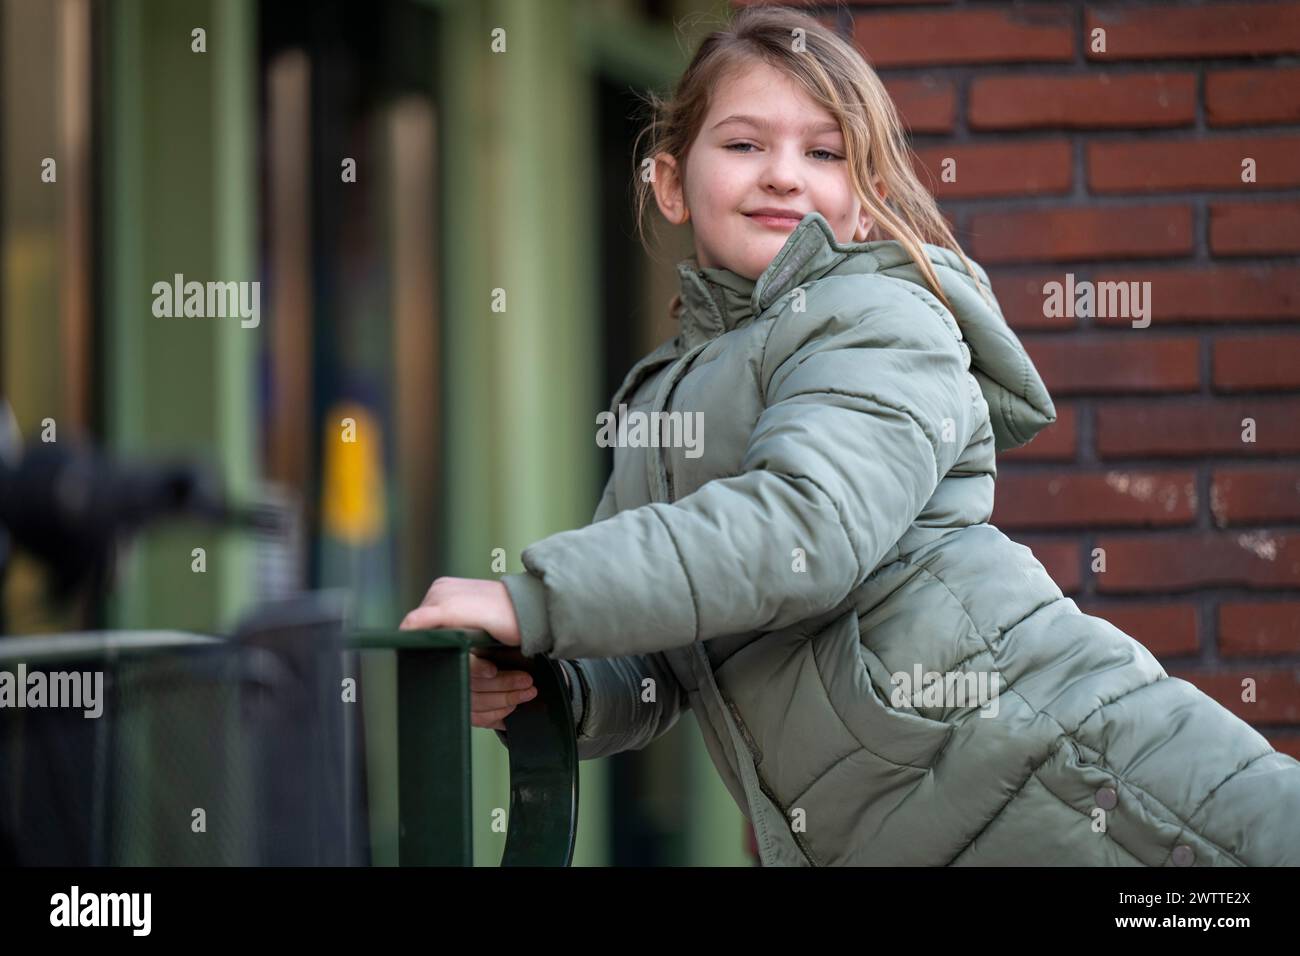 Young girl leaning on a fence with a candid smile Stock Photo